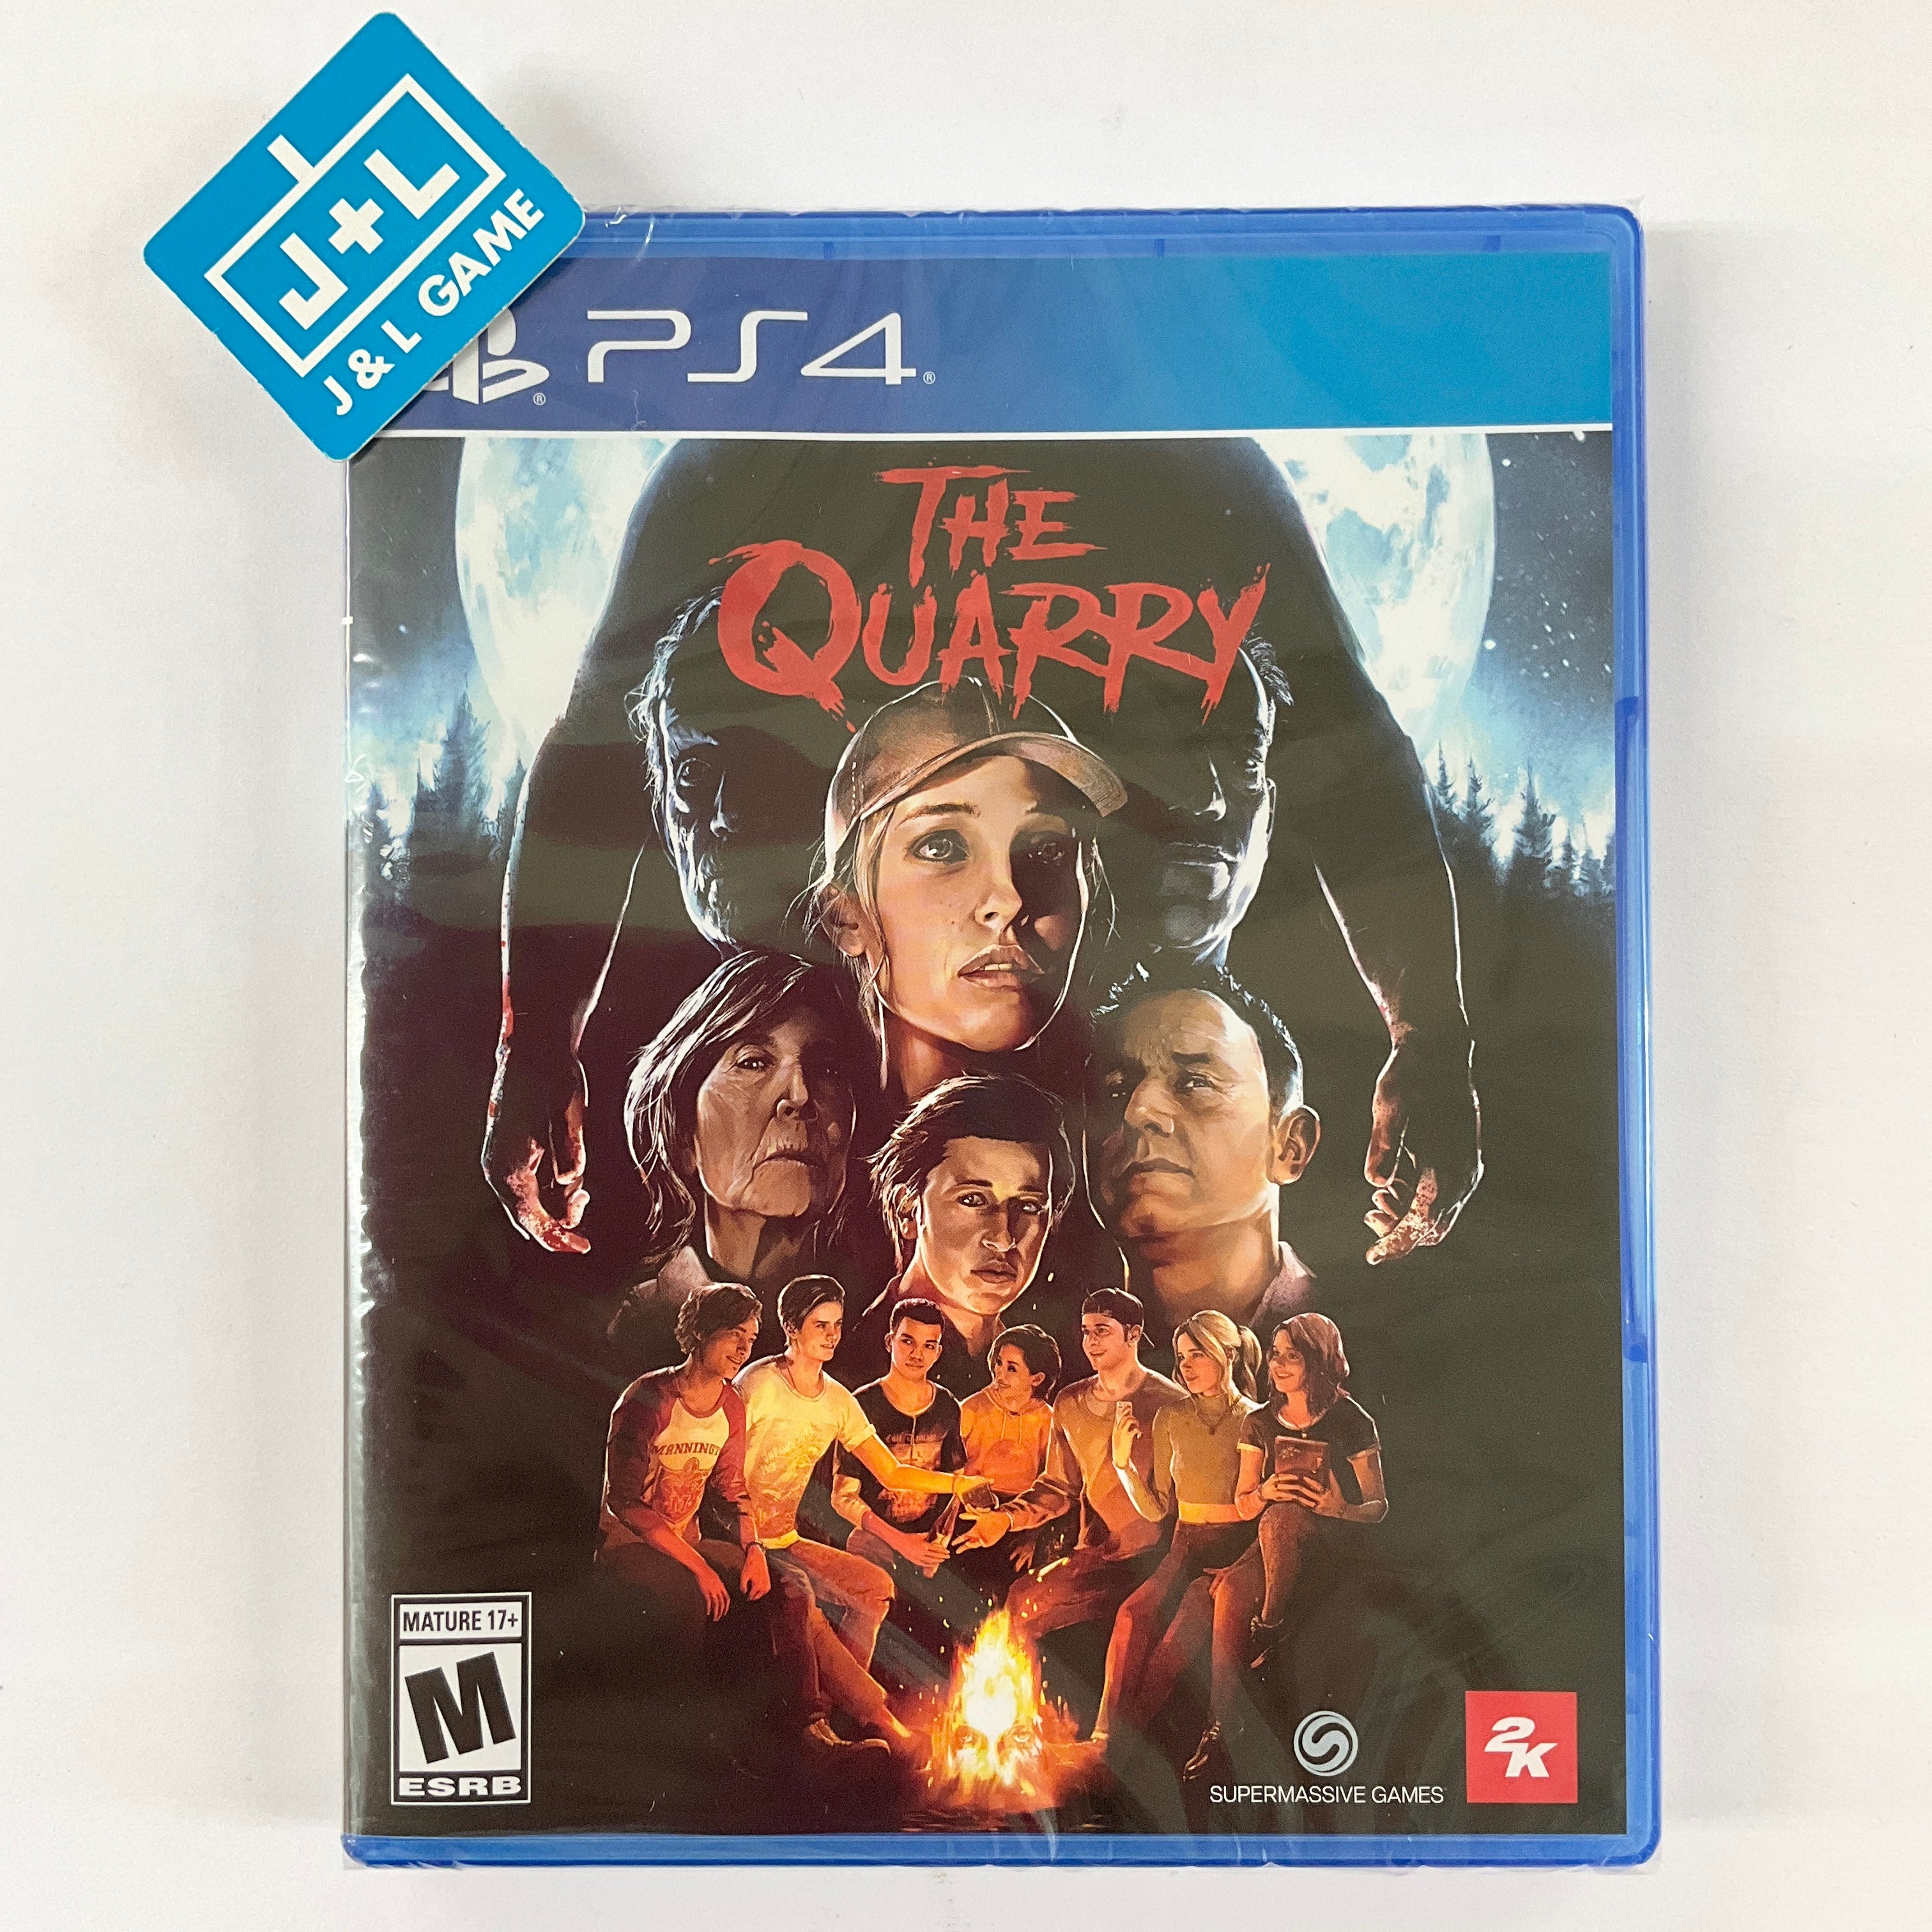 The Quarry on Playstation 4 - Video games & consoles